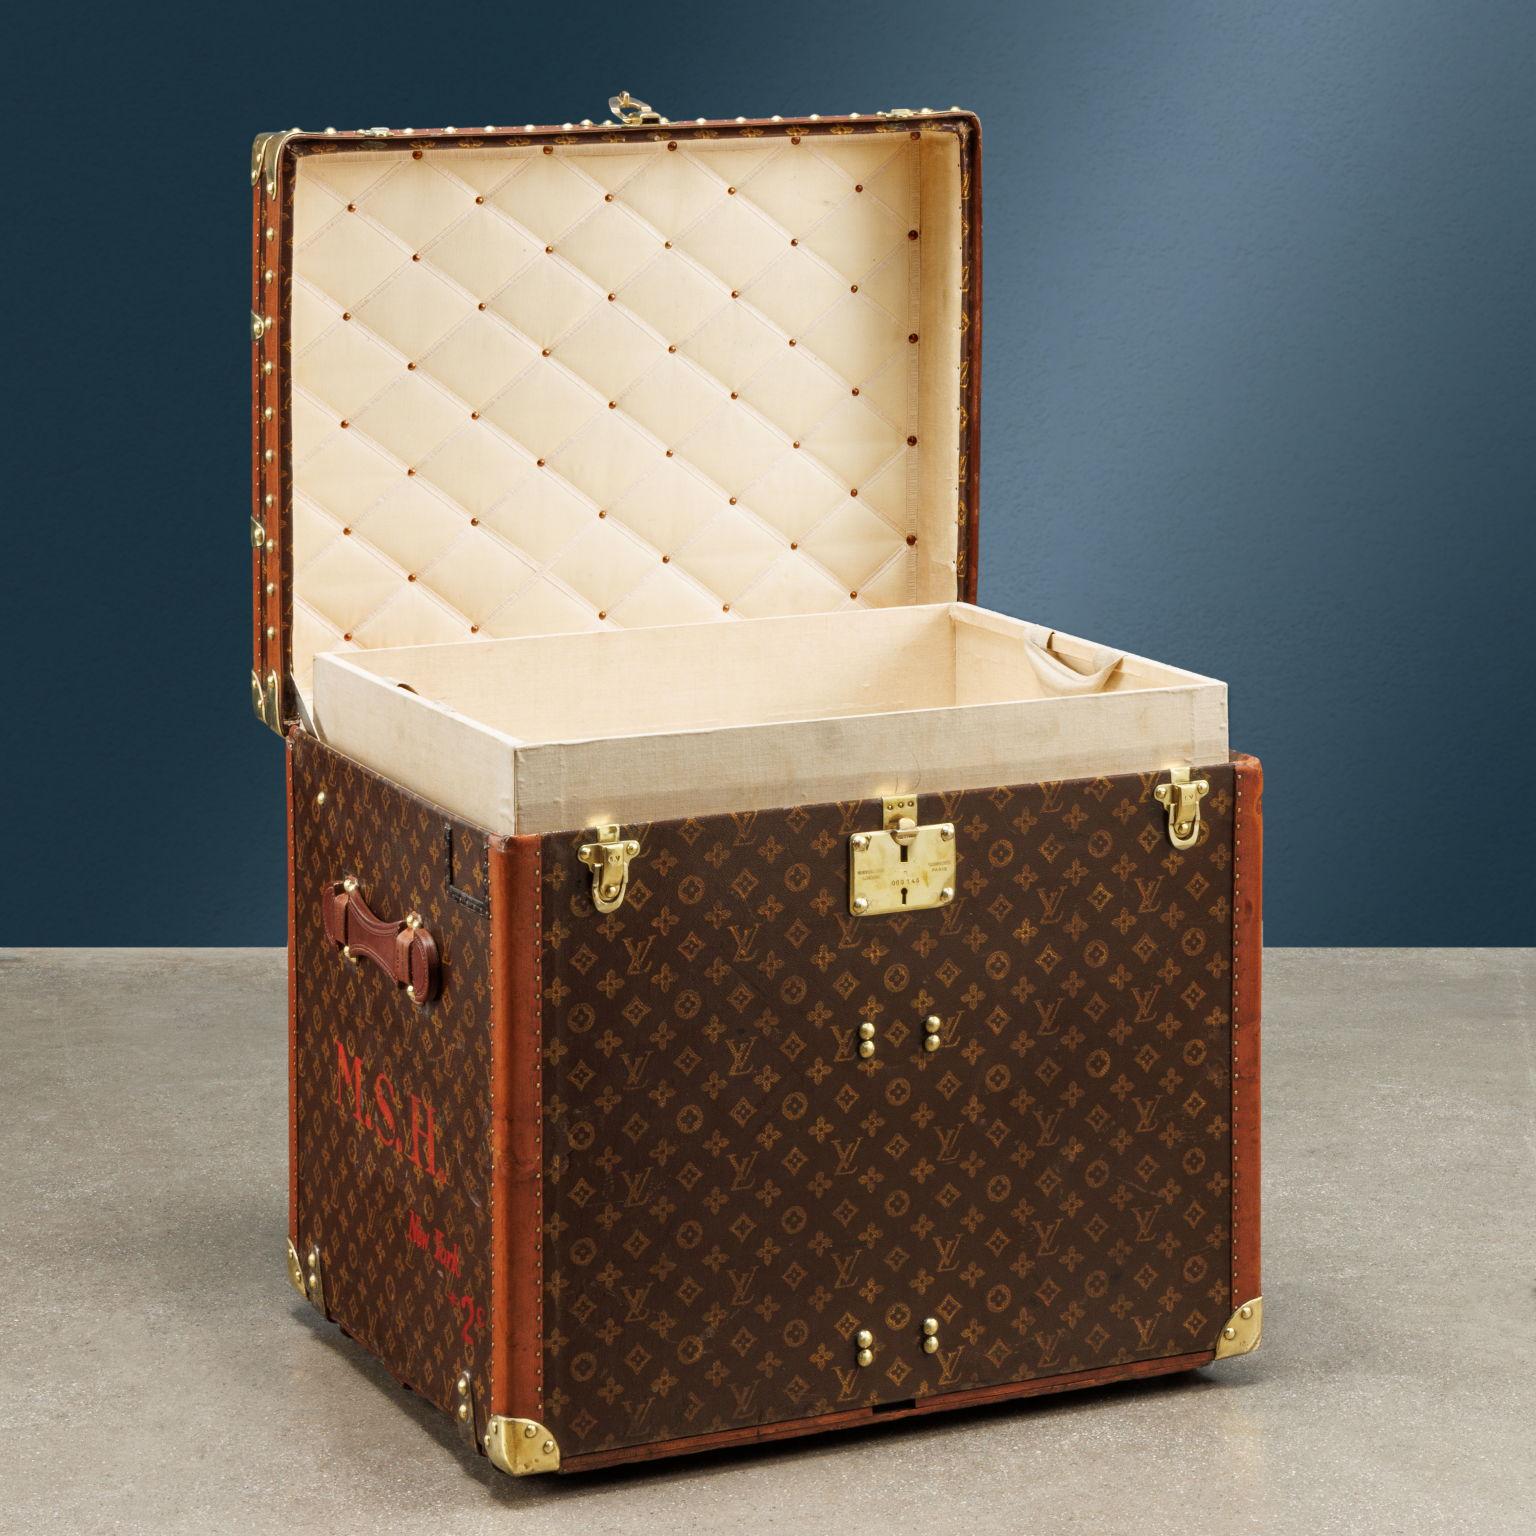 Extremely rare all-zinc cabin trunk by Louis Vuitton, c. 1890s, 1stdibs.com